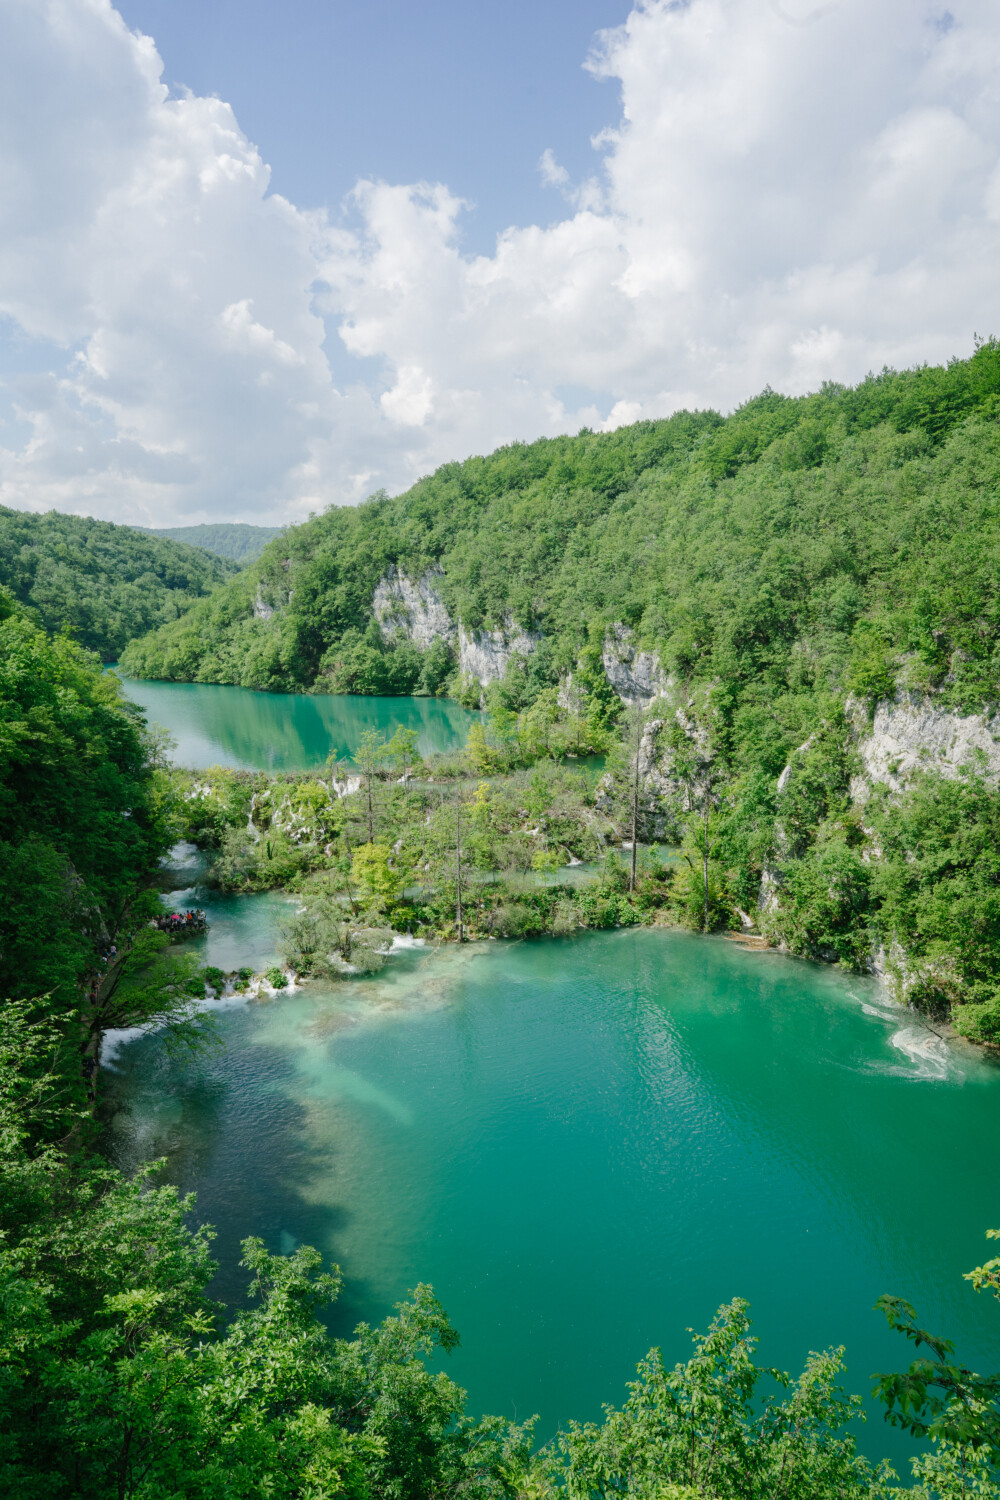 a view of the Plitvice Lakes National Park